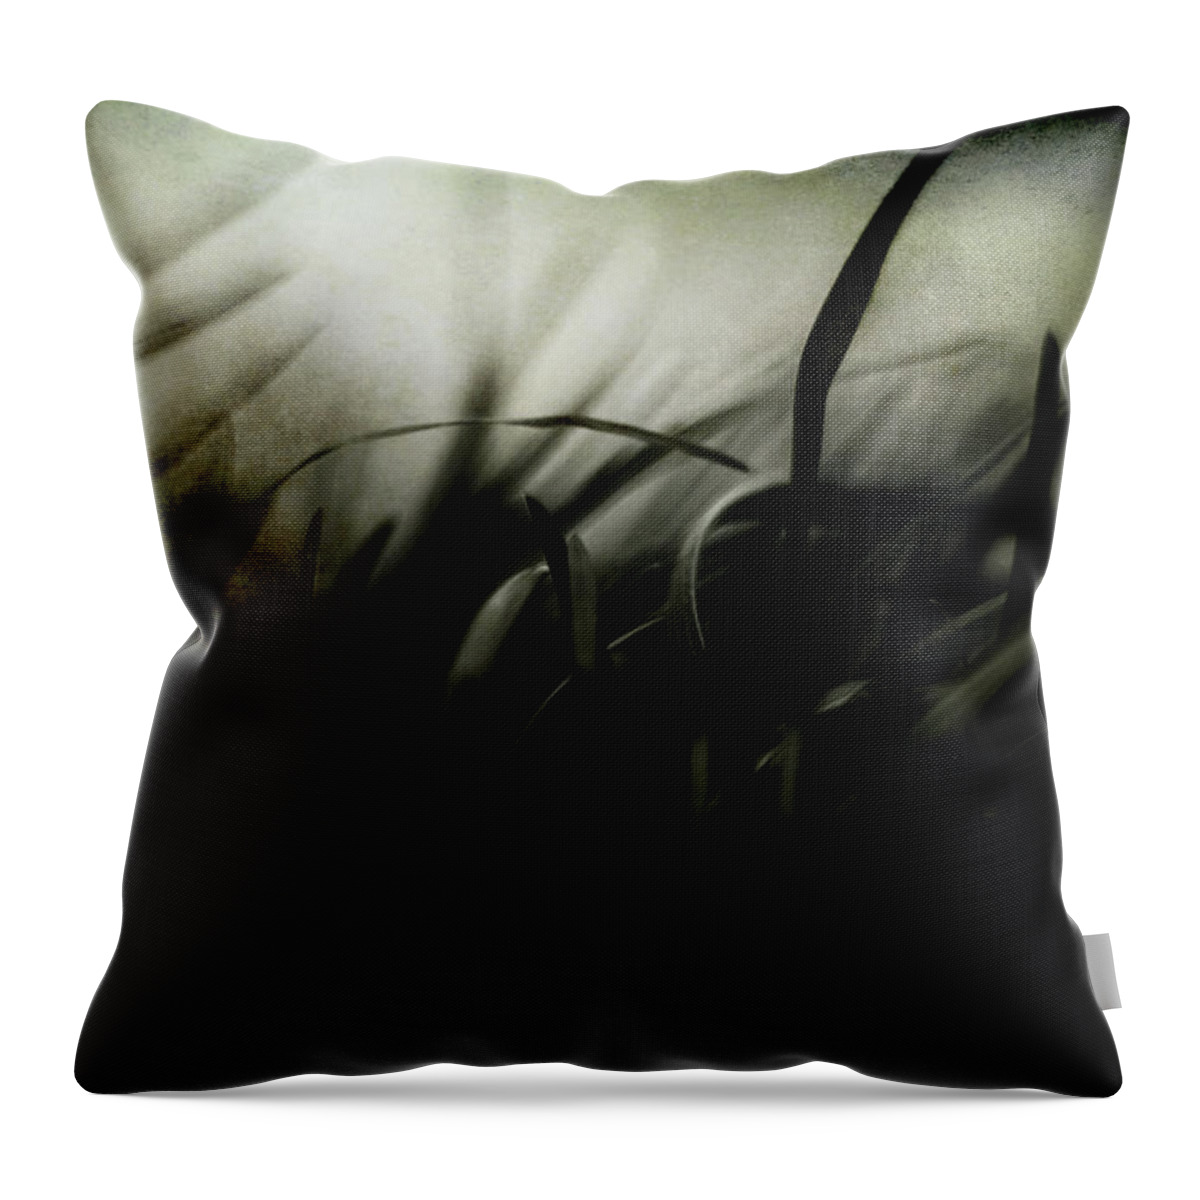 Dark Throw Pillow featuring the photograph Wicked Garden by Rebecca Sherman